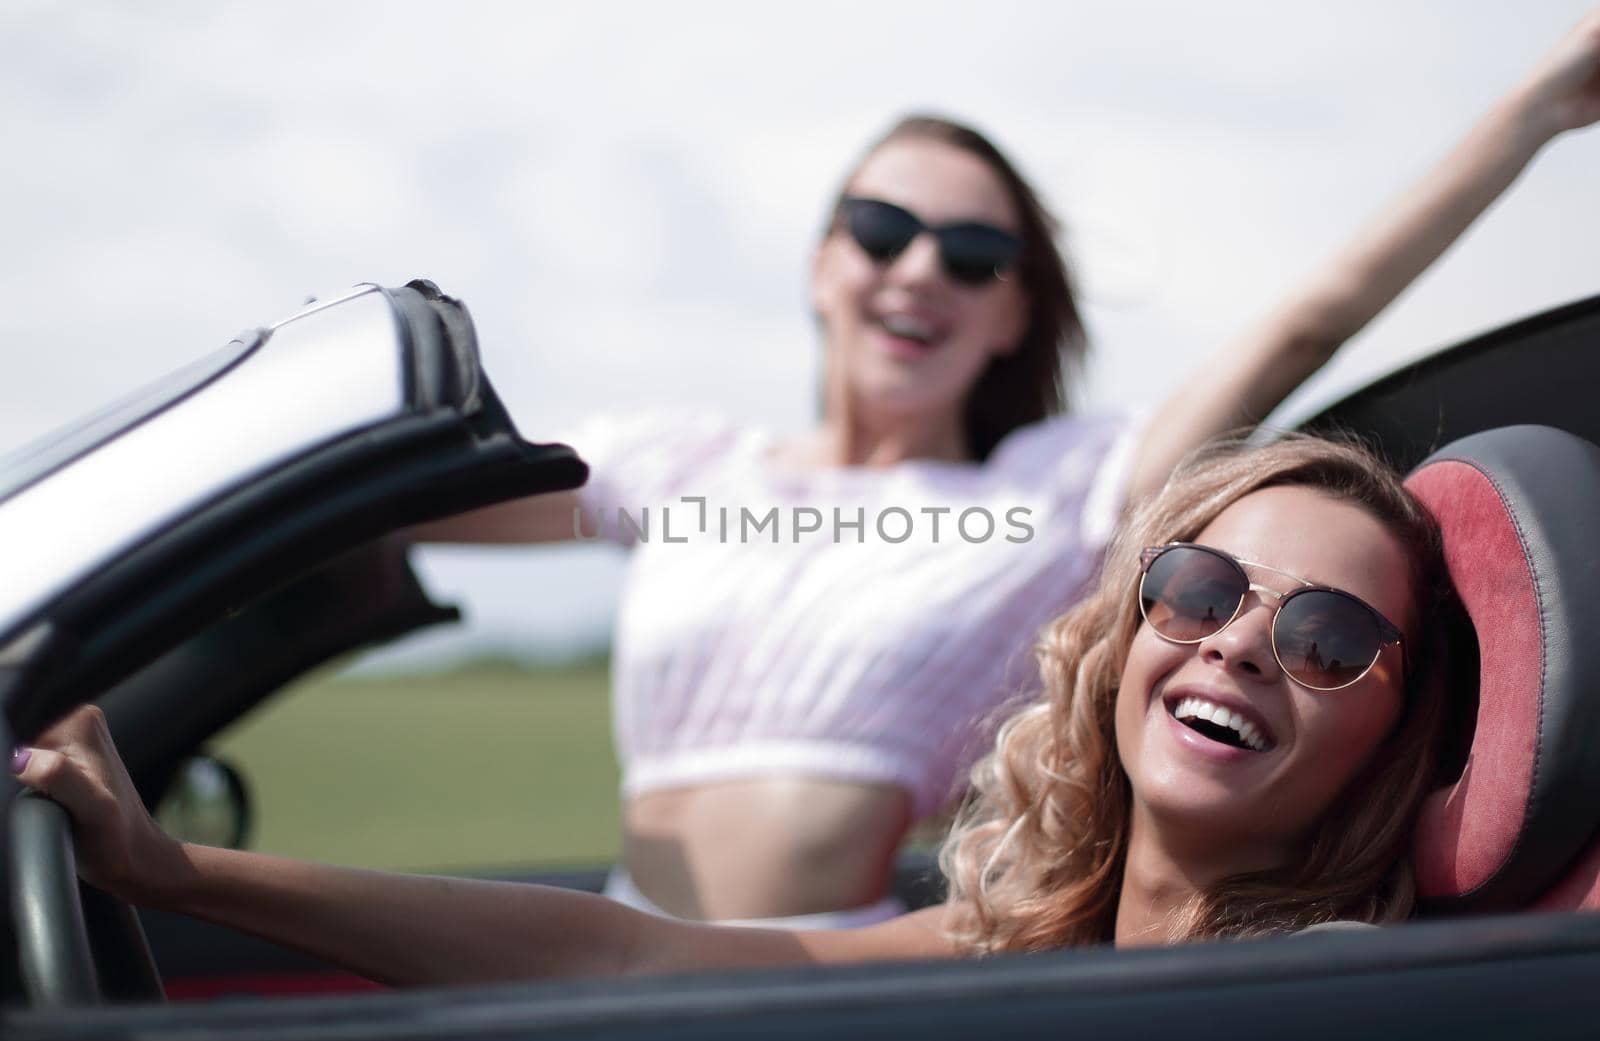 close up.two happy young women in a convertible car . fashionable lifestyle